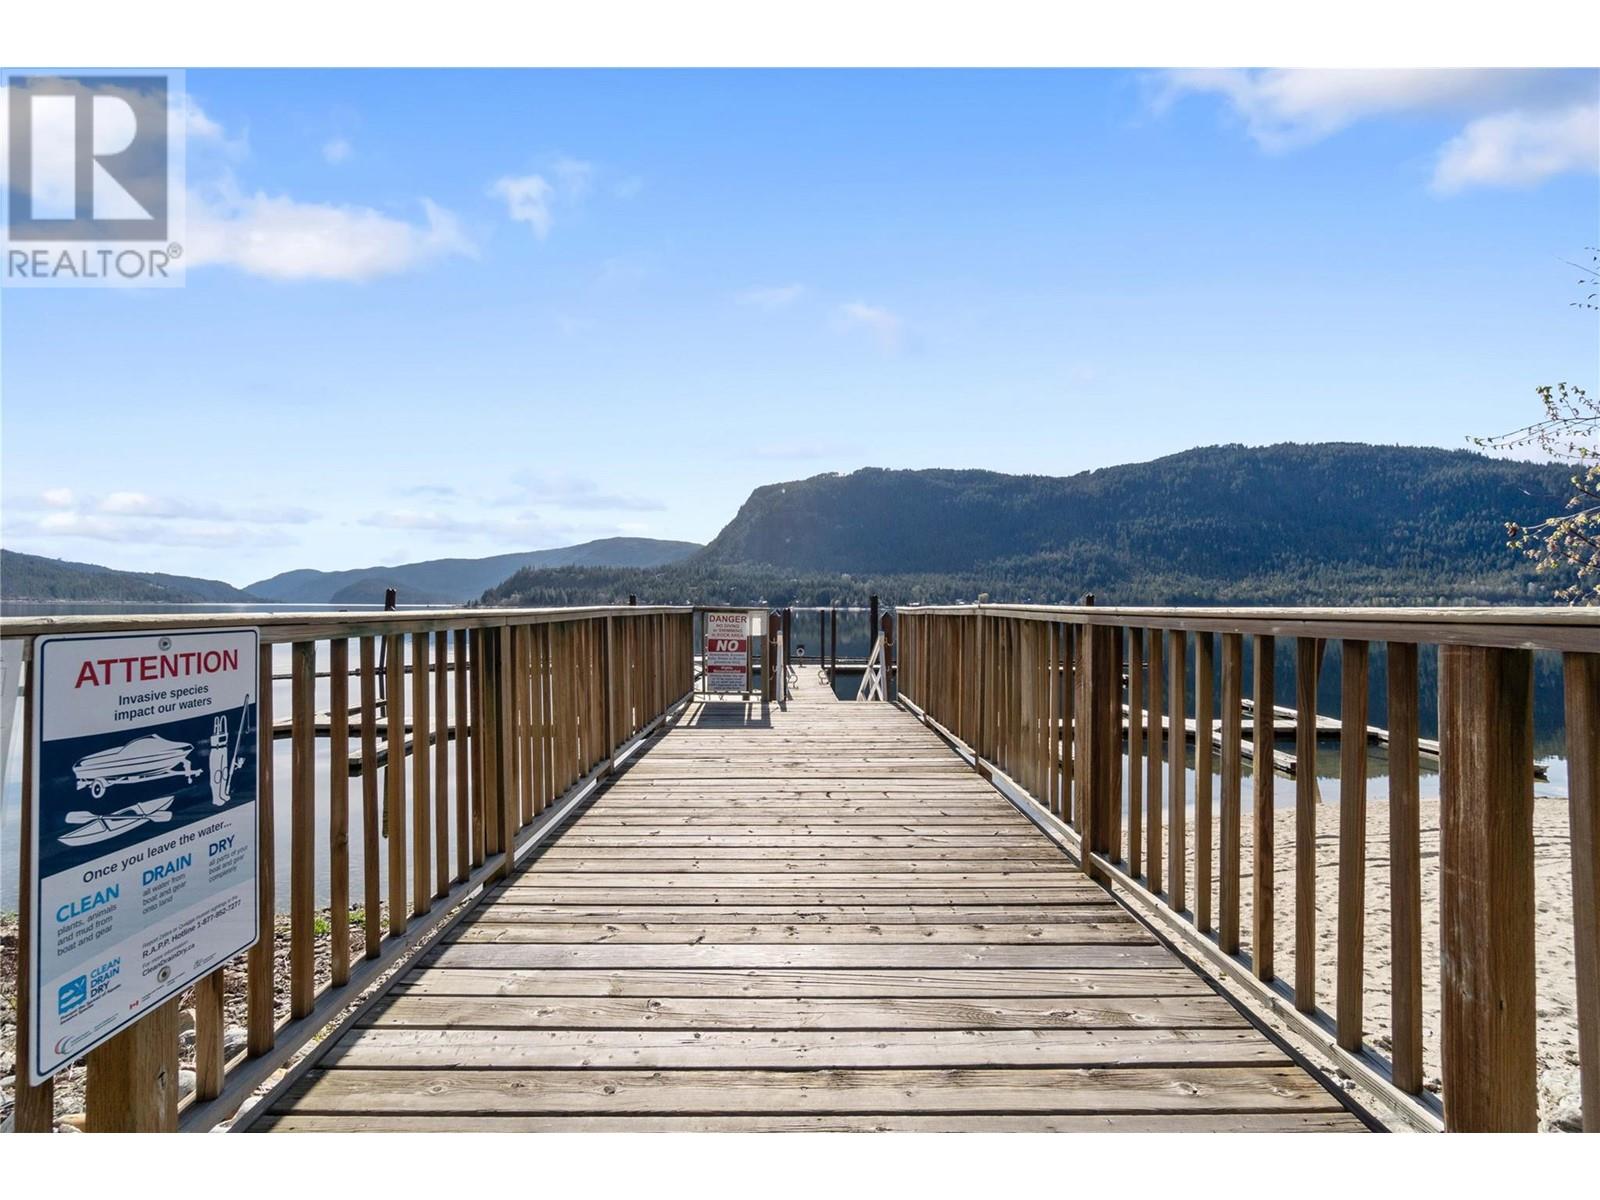 23 202 97A Highway, Sicamous